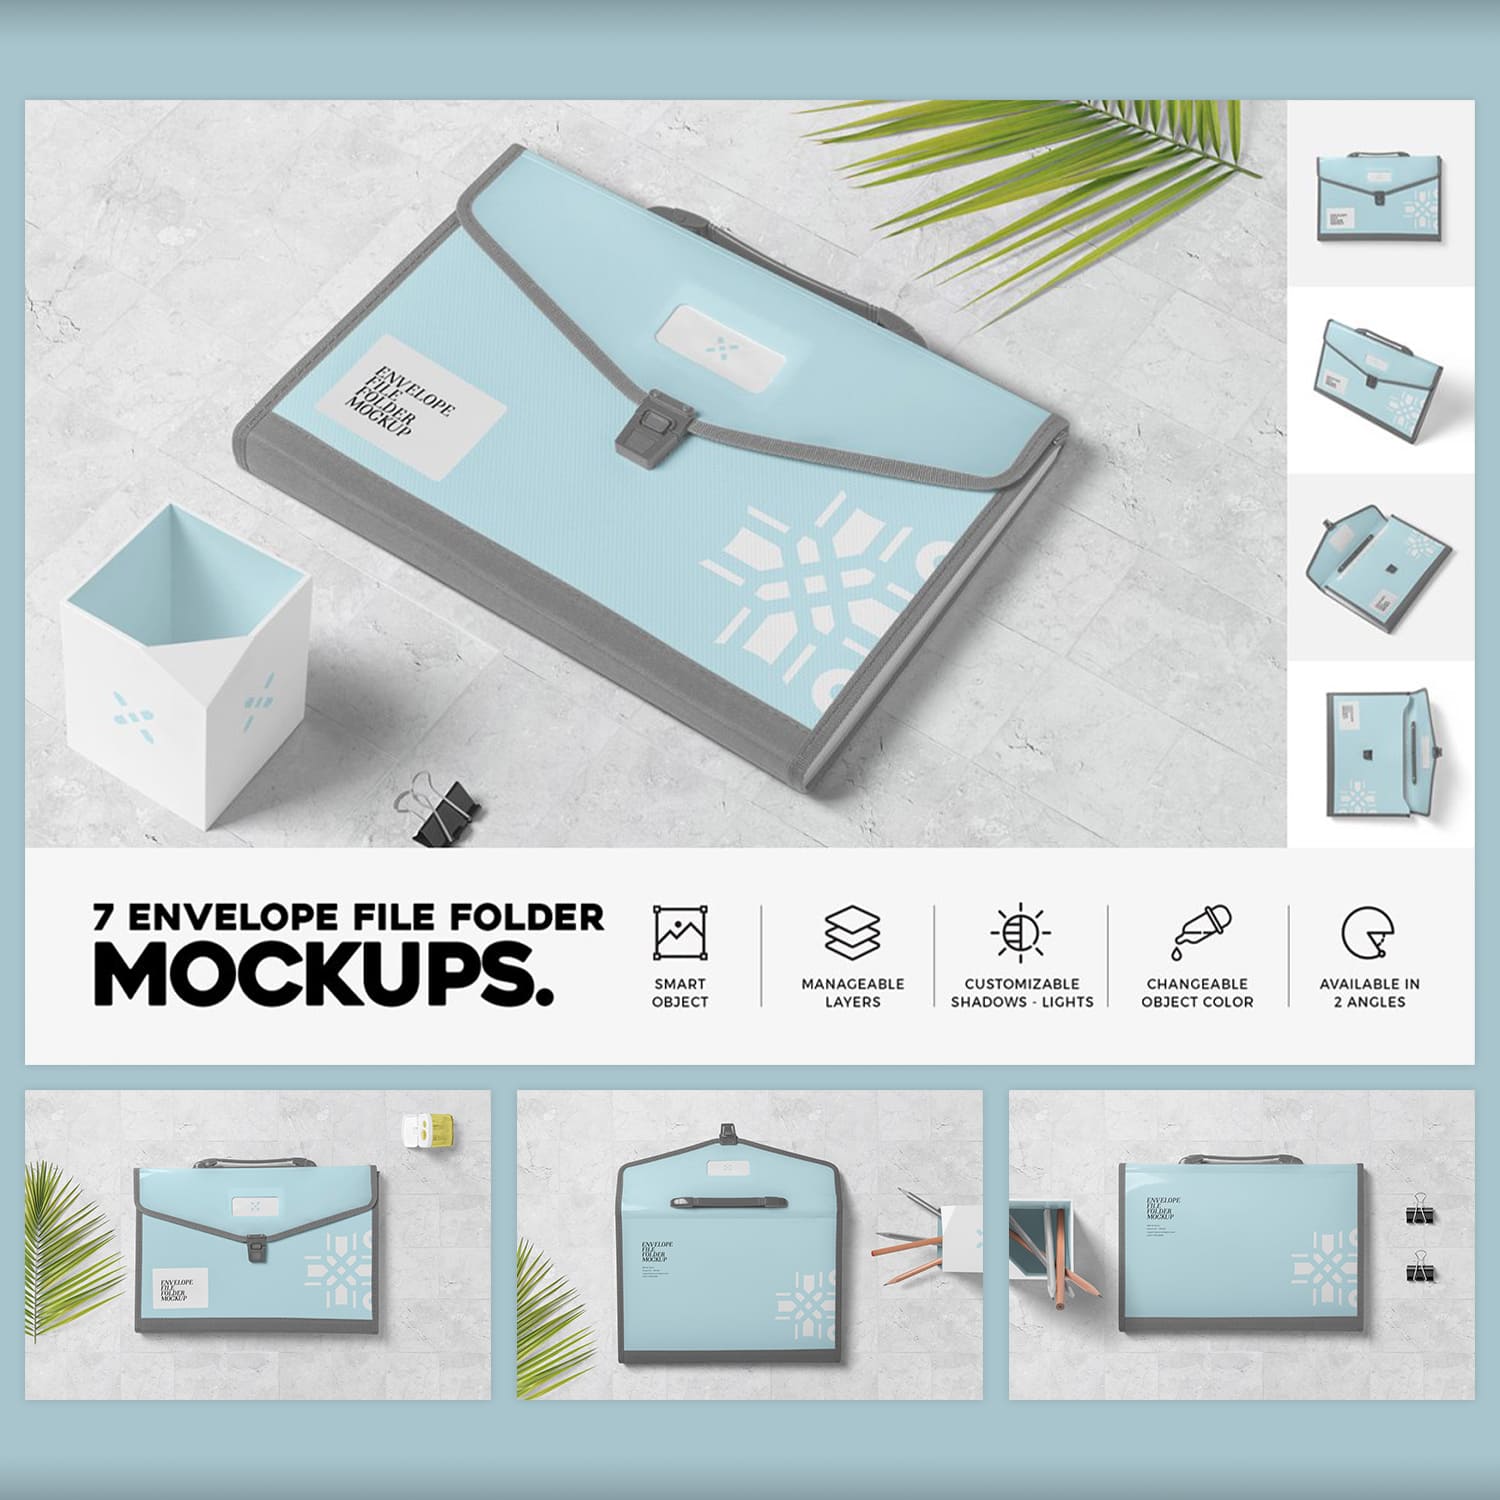 Pack of images of envelope files folders with great designs.